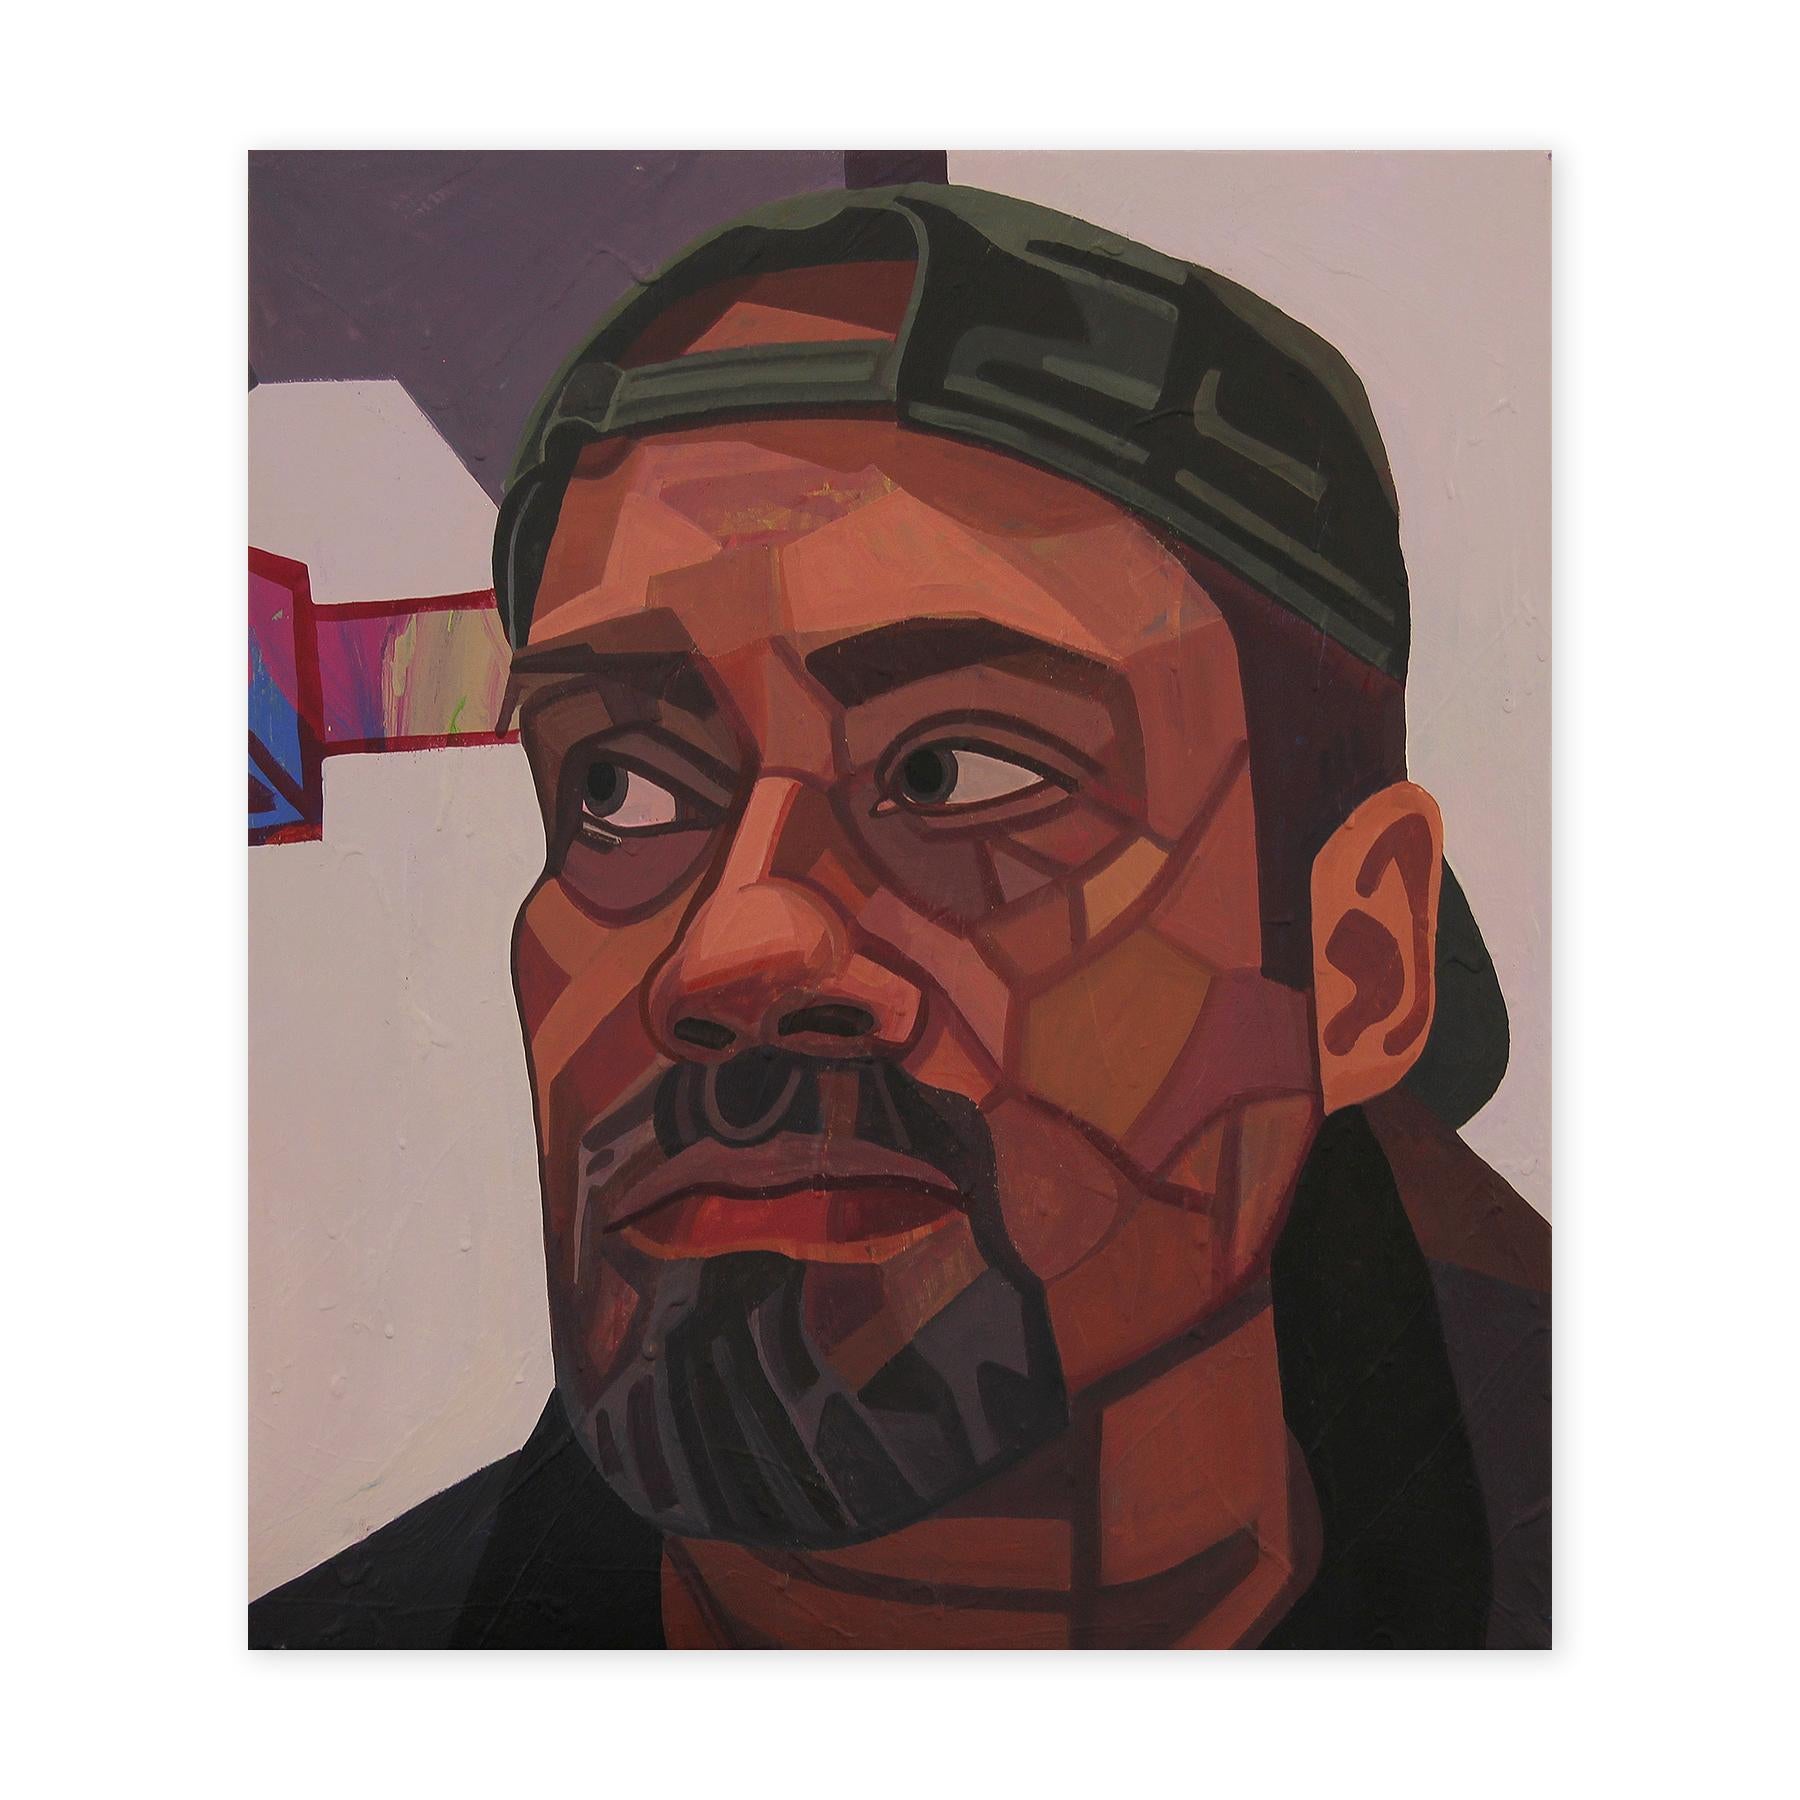 Purple-toned abstract contemporary painting by Houston, TX artist Saralene Tapley. This portrait features a man wearing a baseball cap set against a purple background. Unframed but framing options are available. Signed by the artist at the